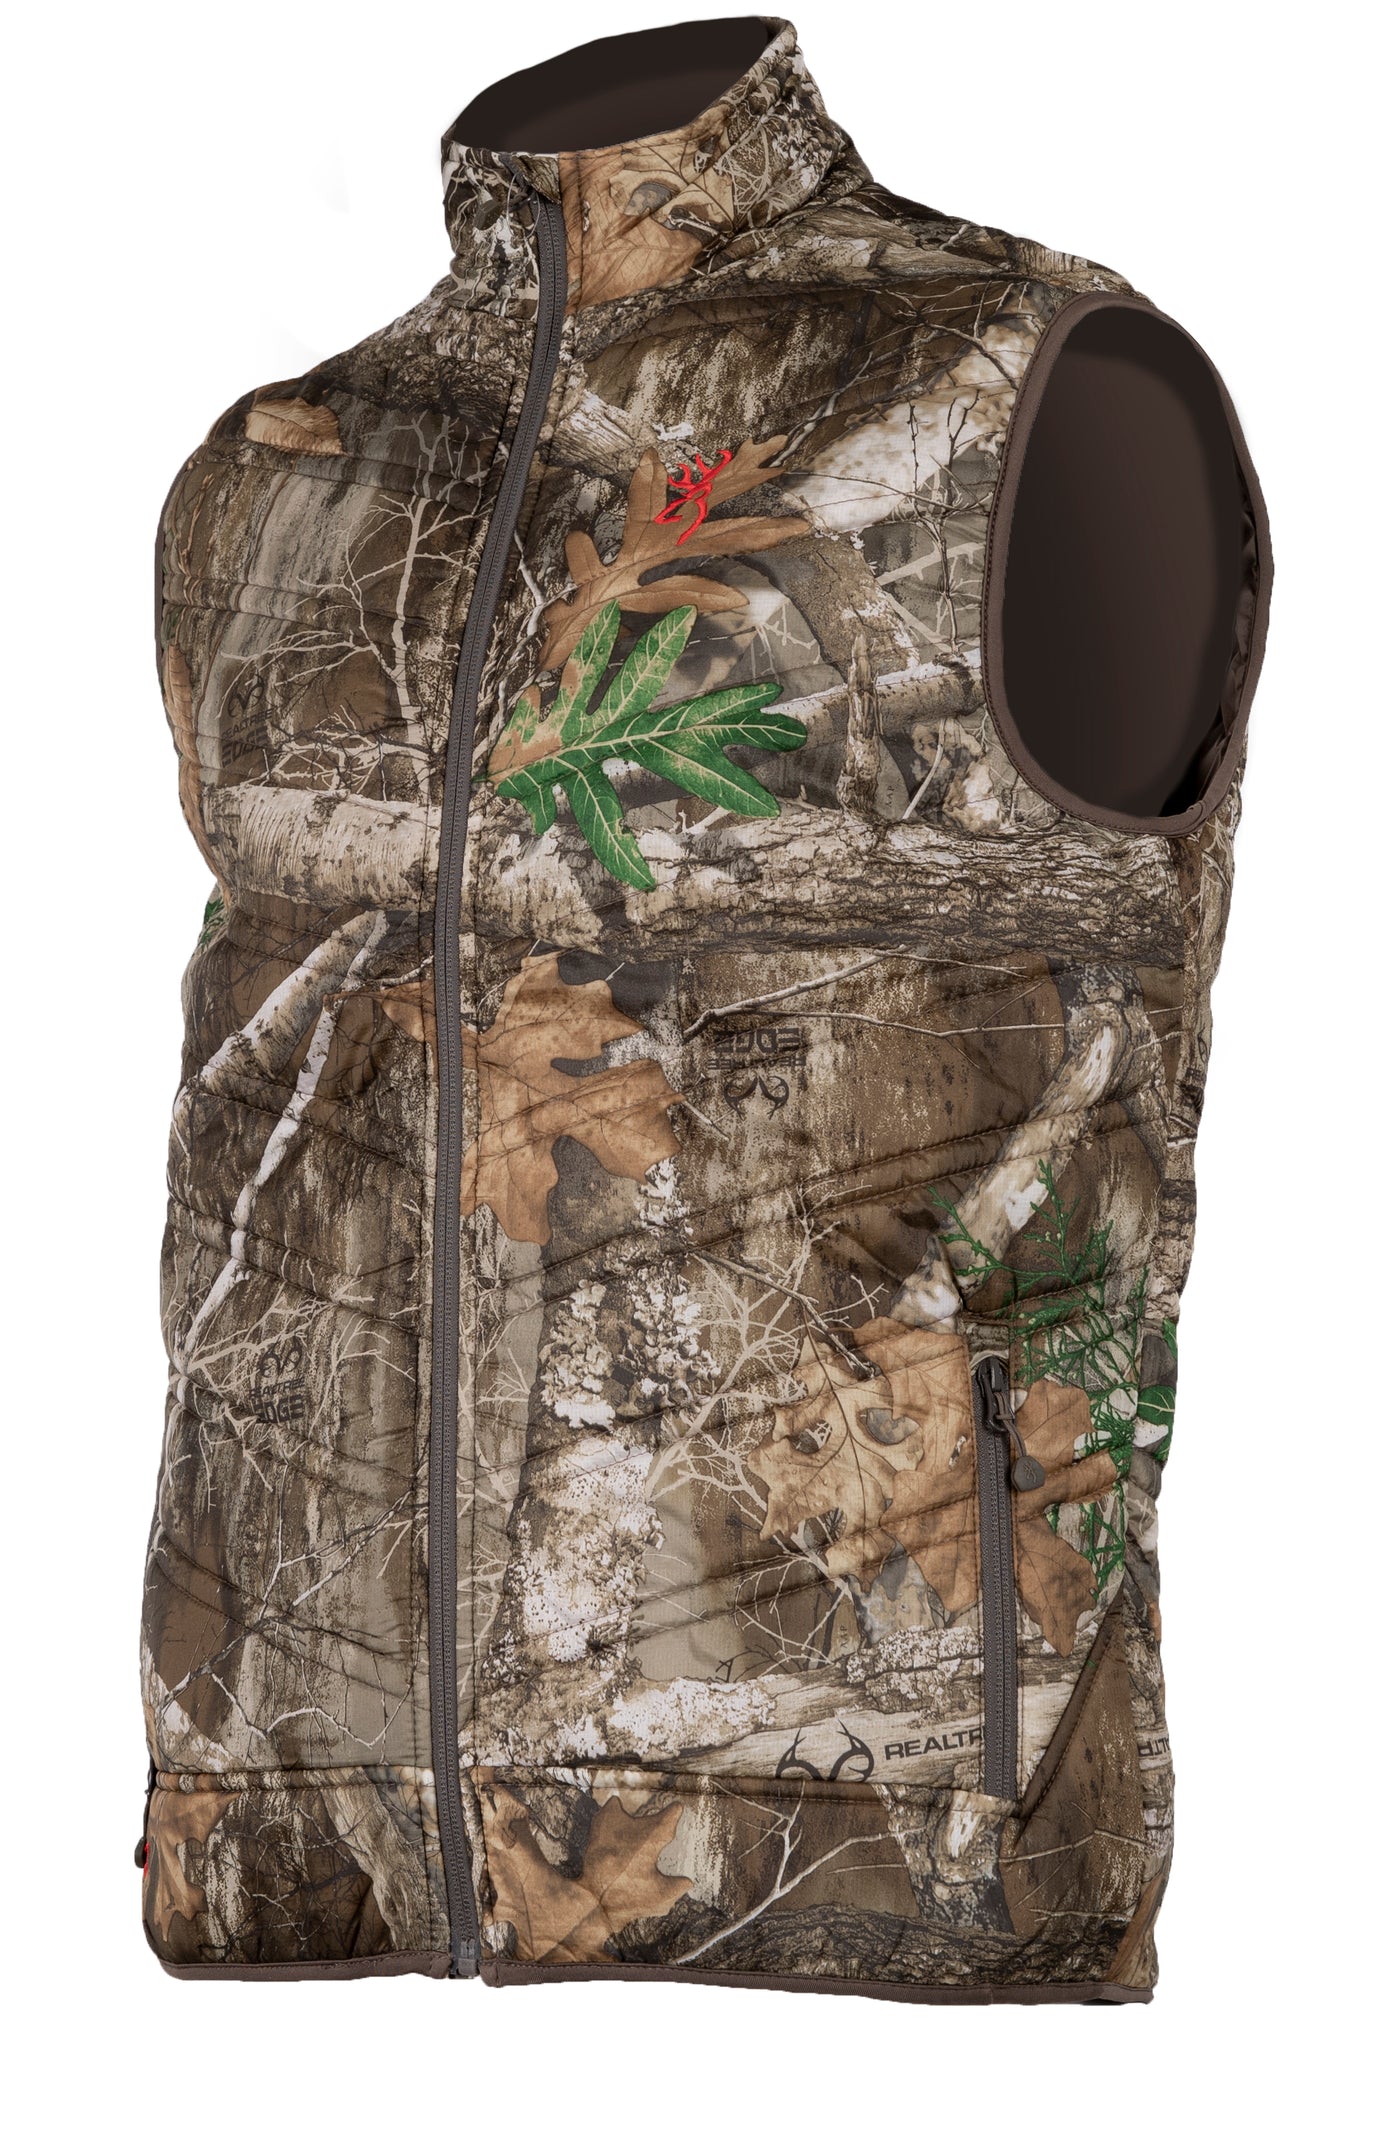 Sleeveless jacket from BROWNING